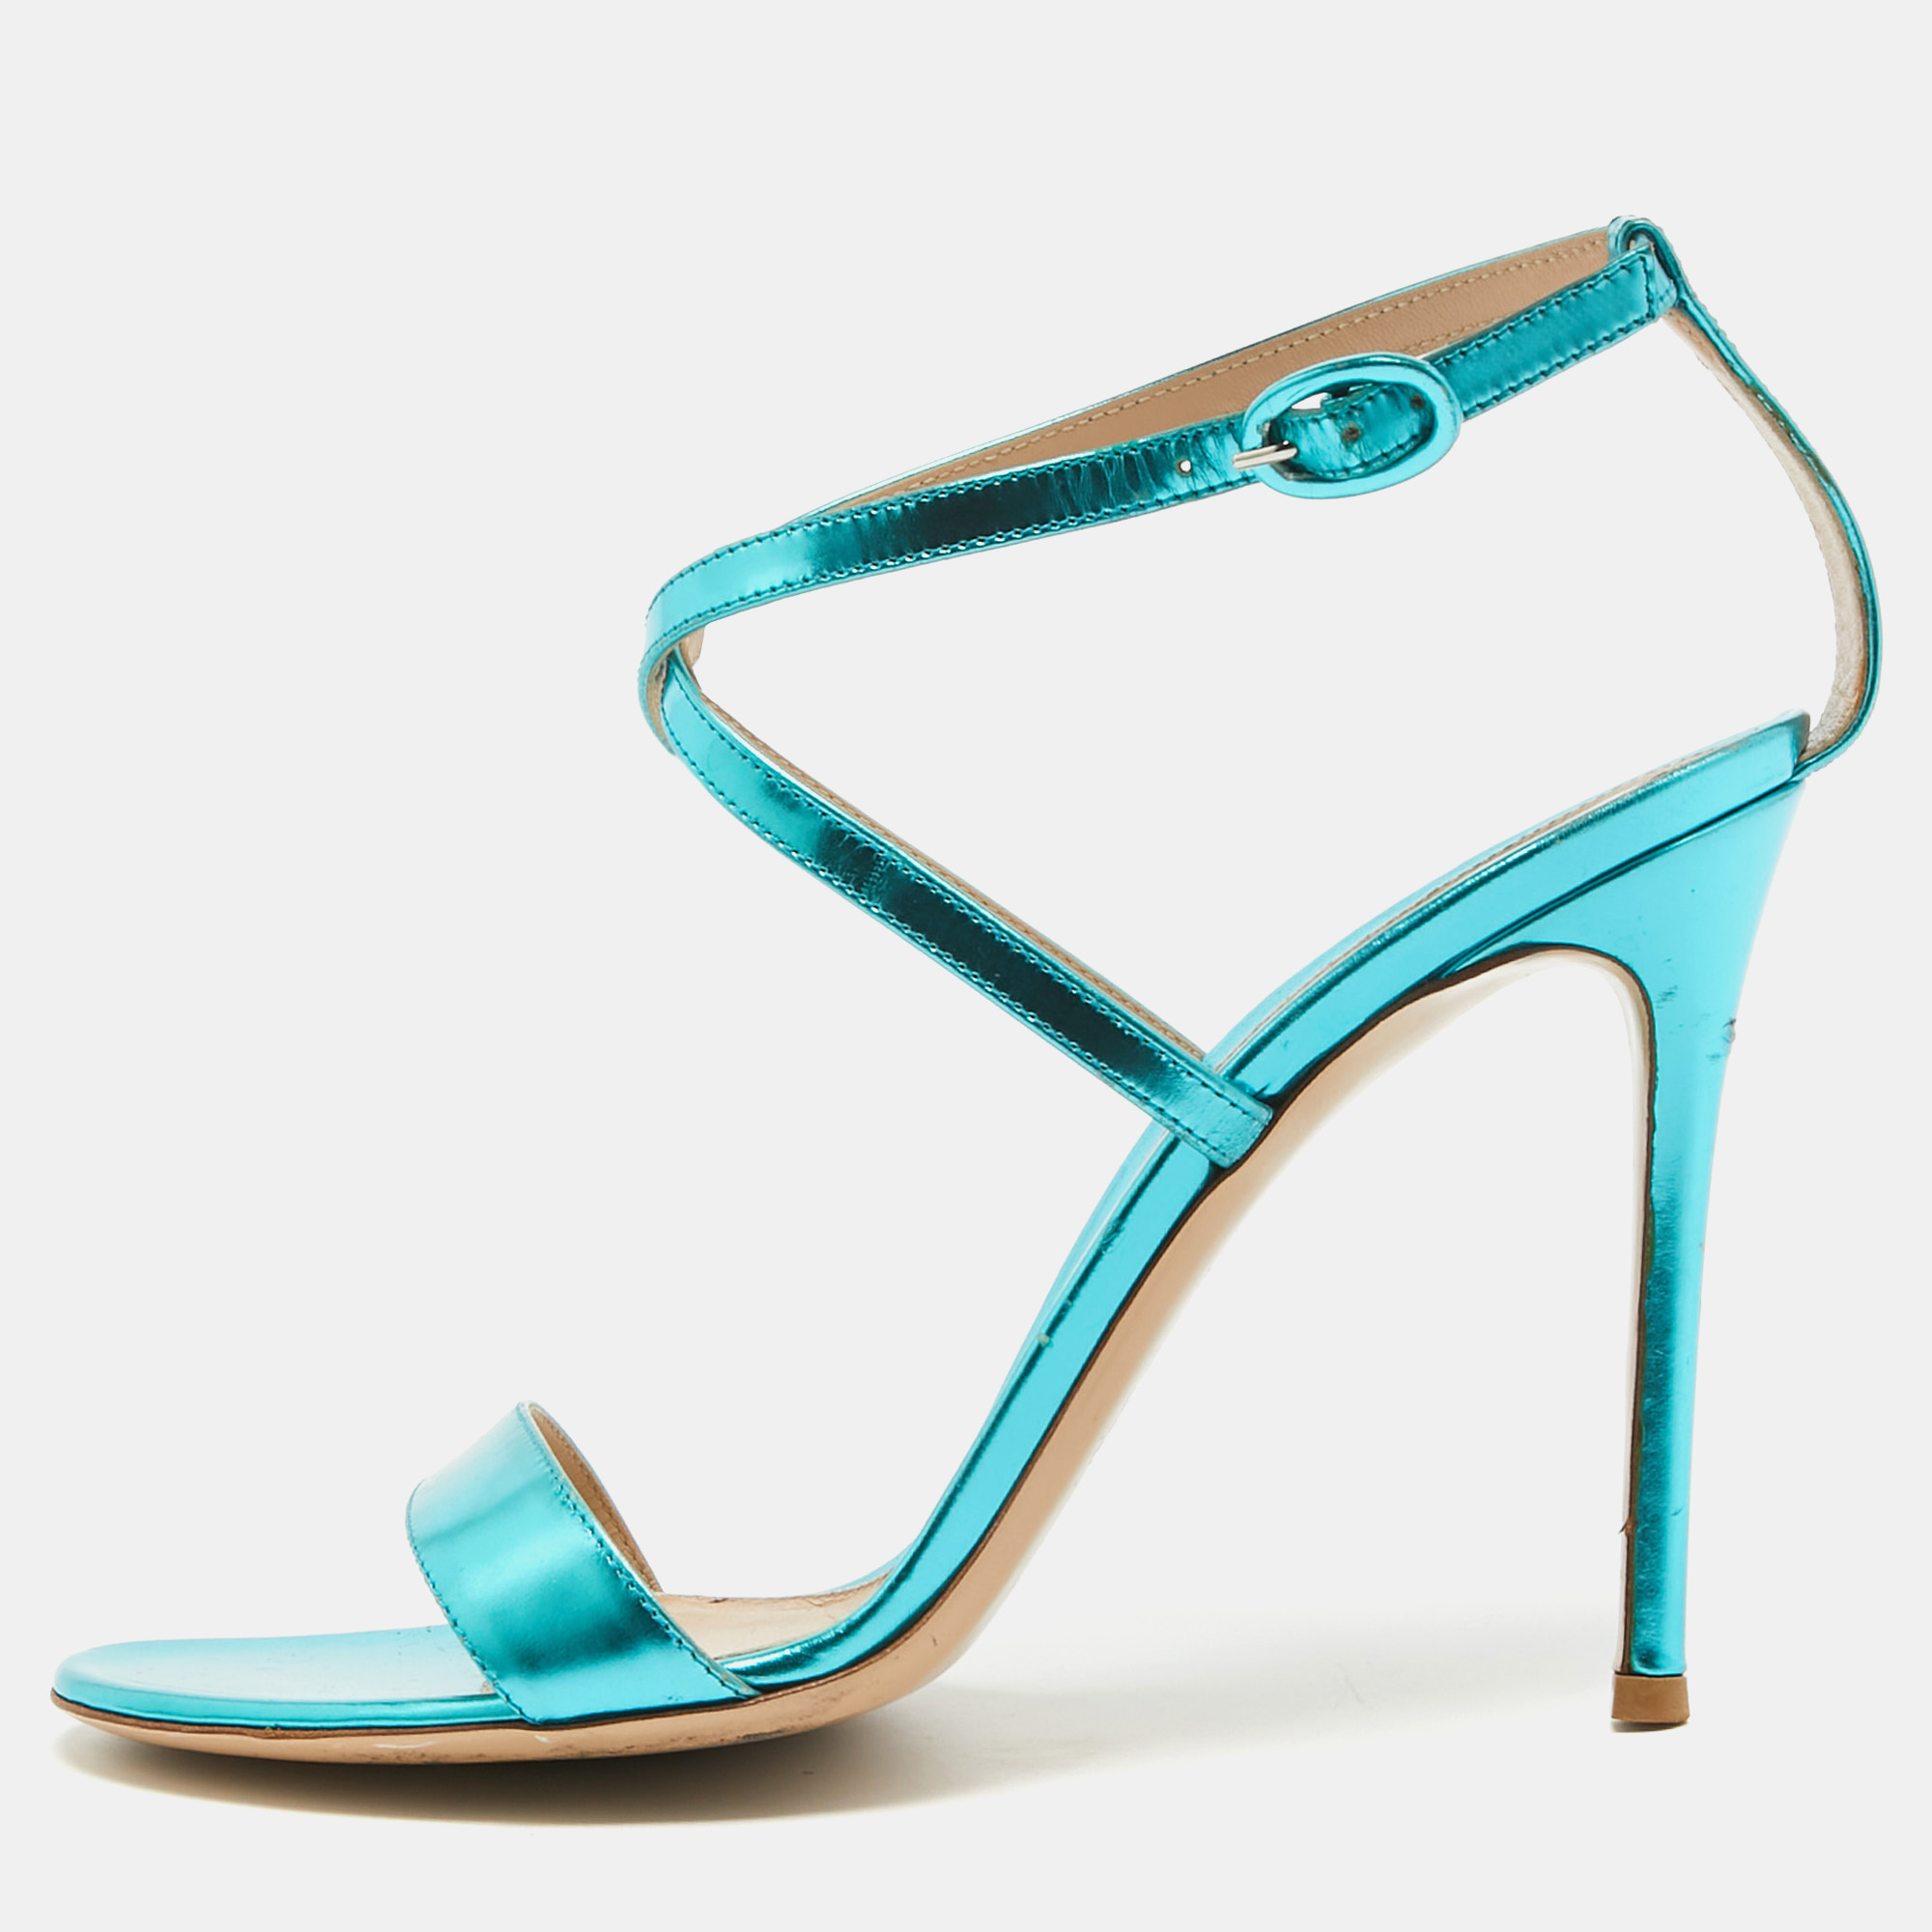 Pre-owned Gianvito Rossi Metallic Blue Leather Cross Ankle Strap Sandals Size 39